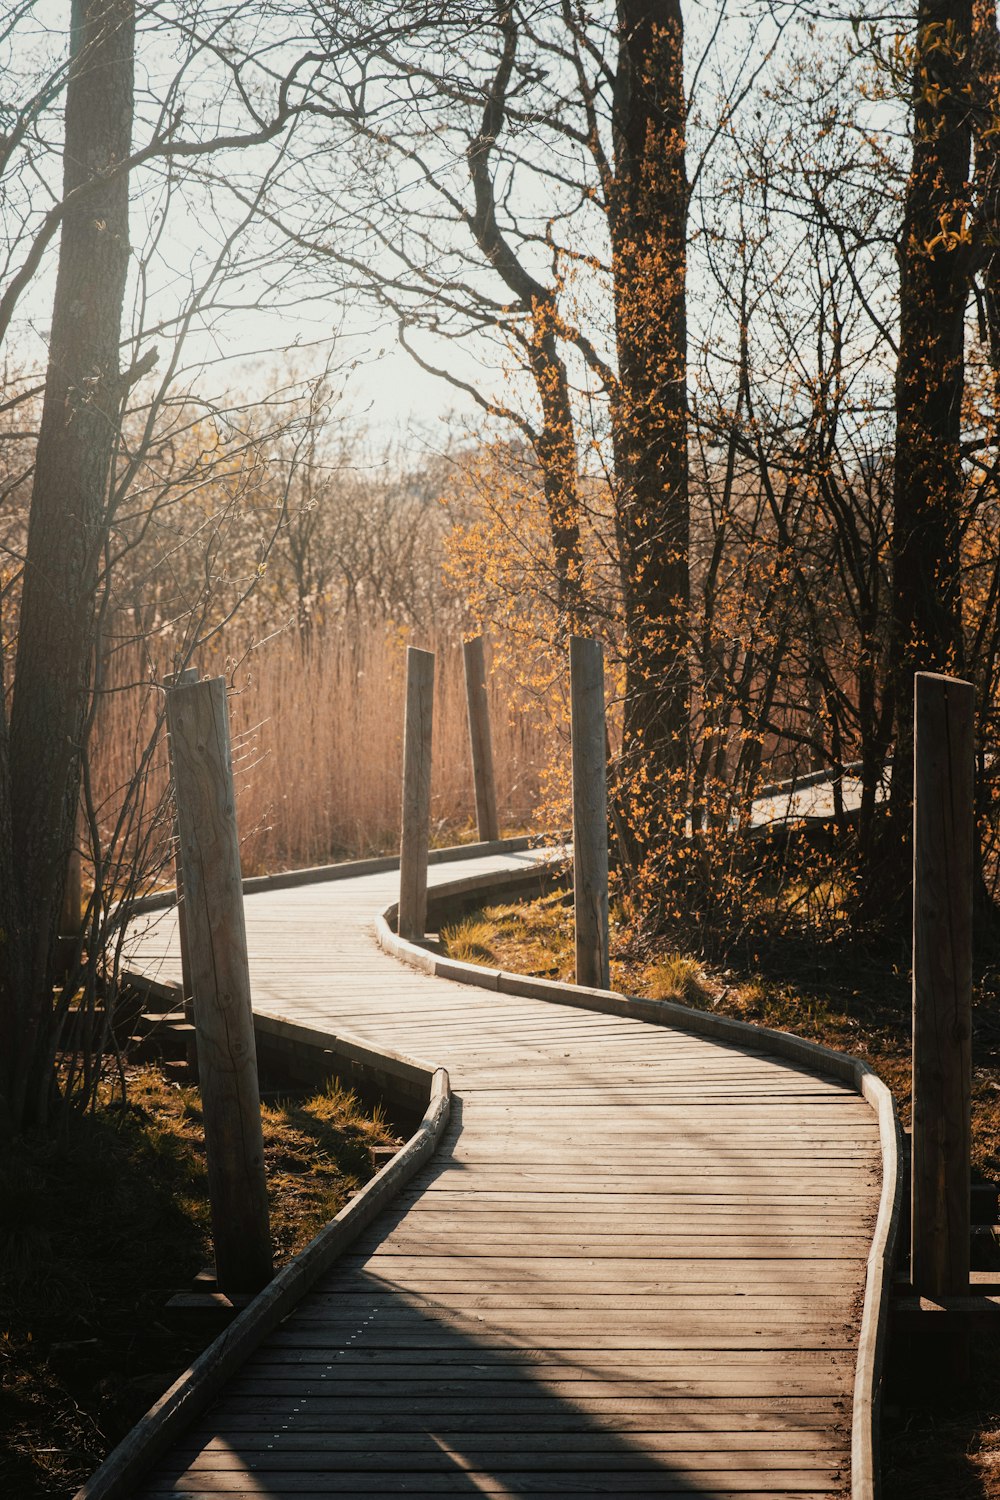 brown wooden pathway in between bare trees during daytime